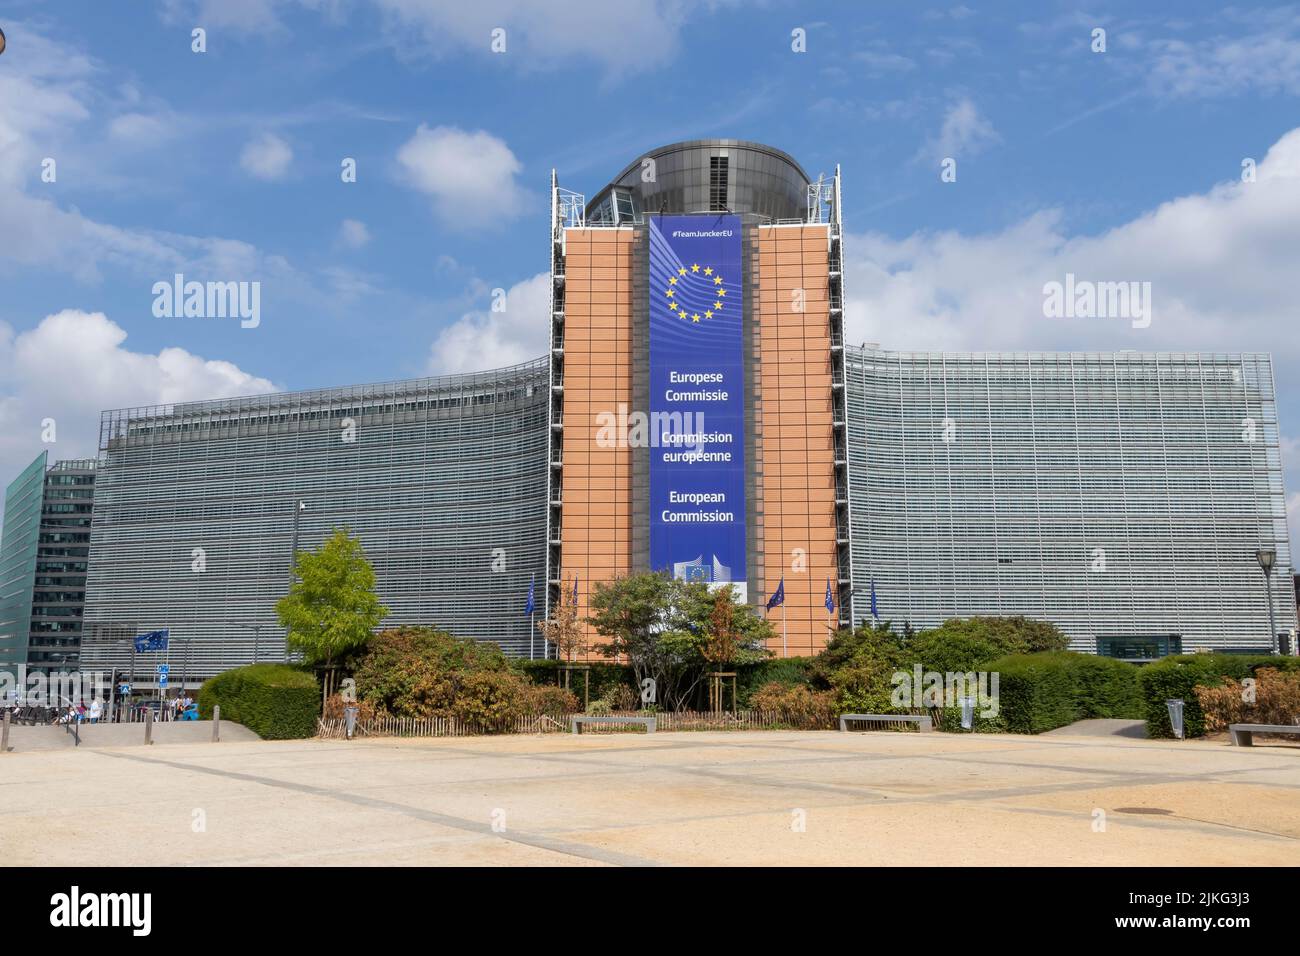 Brussels, Belgium - July 17, 2018: Le Berlaymont, European Commission headquarters building, designed by Lucien de Vestel and opened in the 1960s. Stock Photo